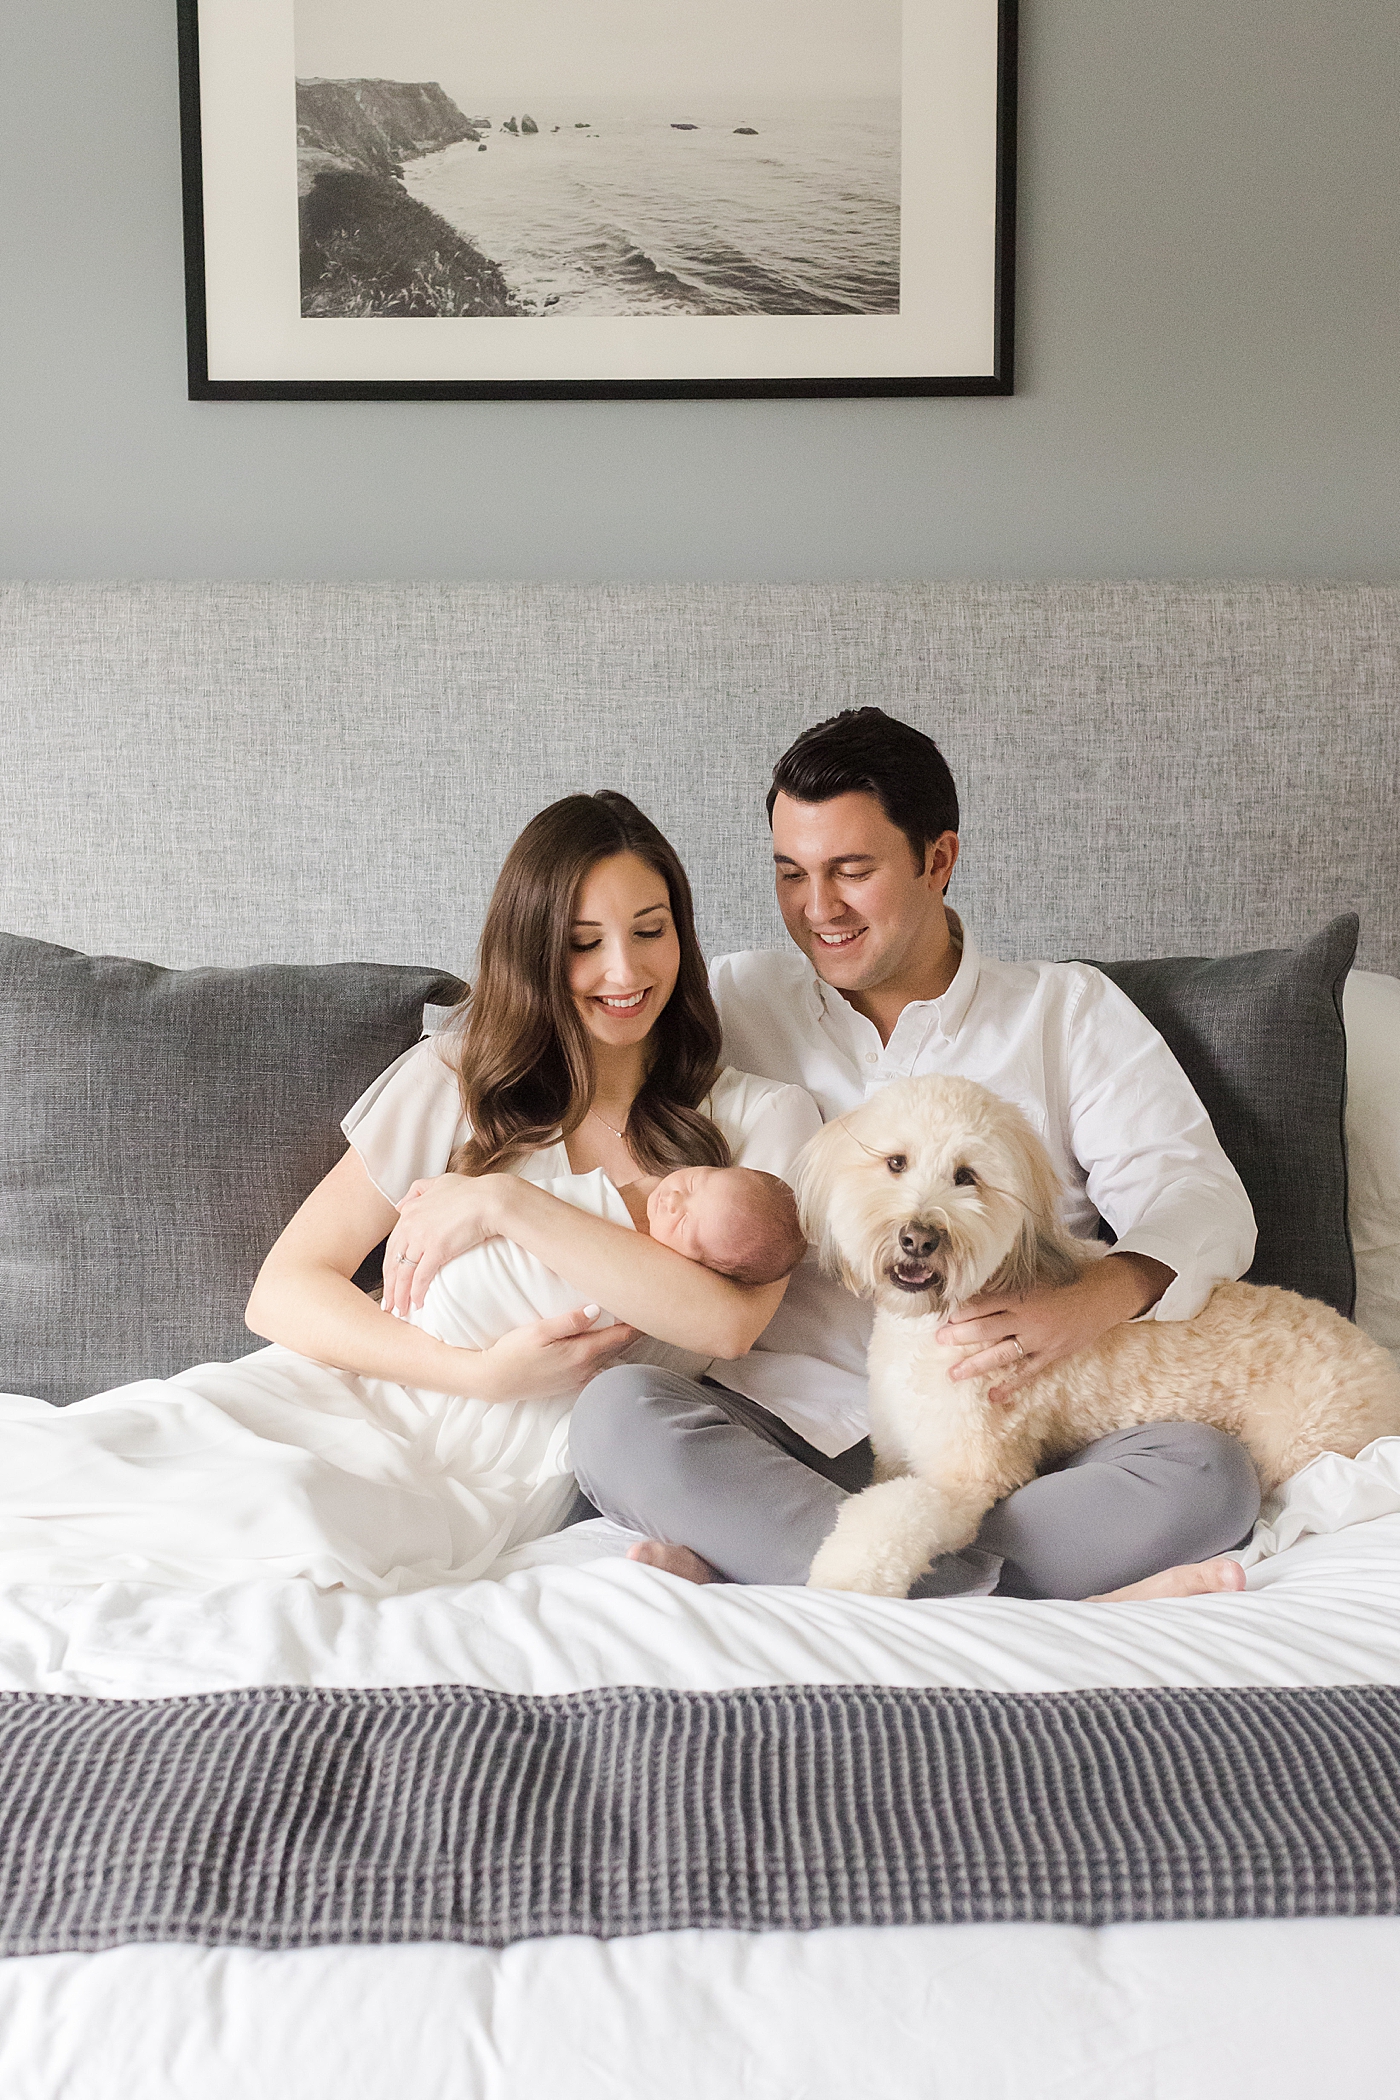 during their Lifestyle Newborn Session | Image by Emily Gerald Photography